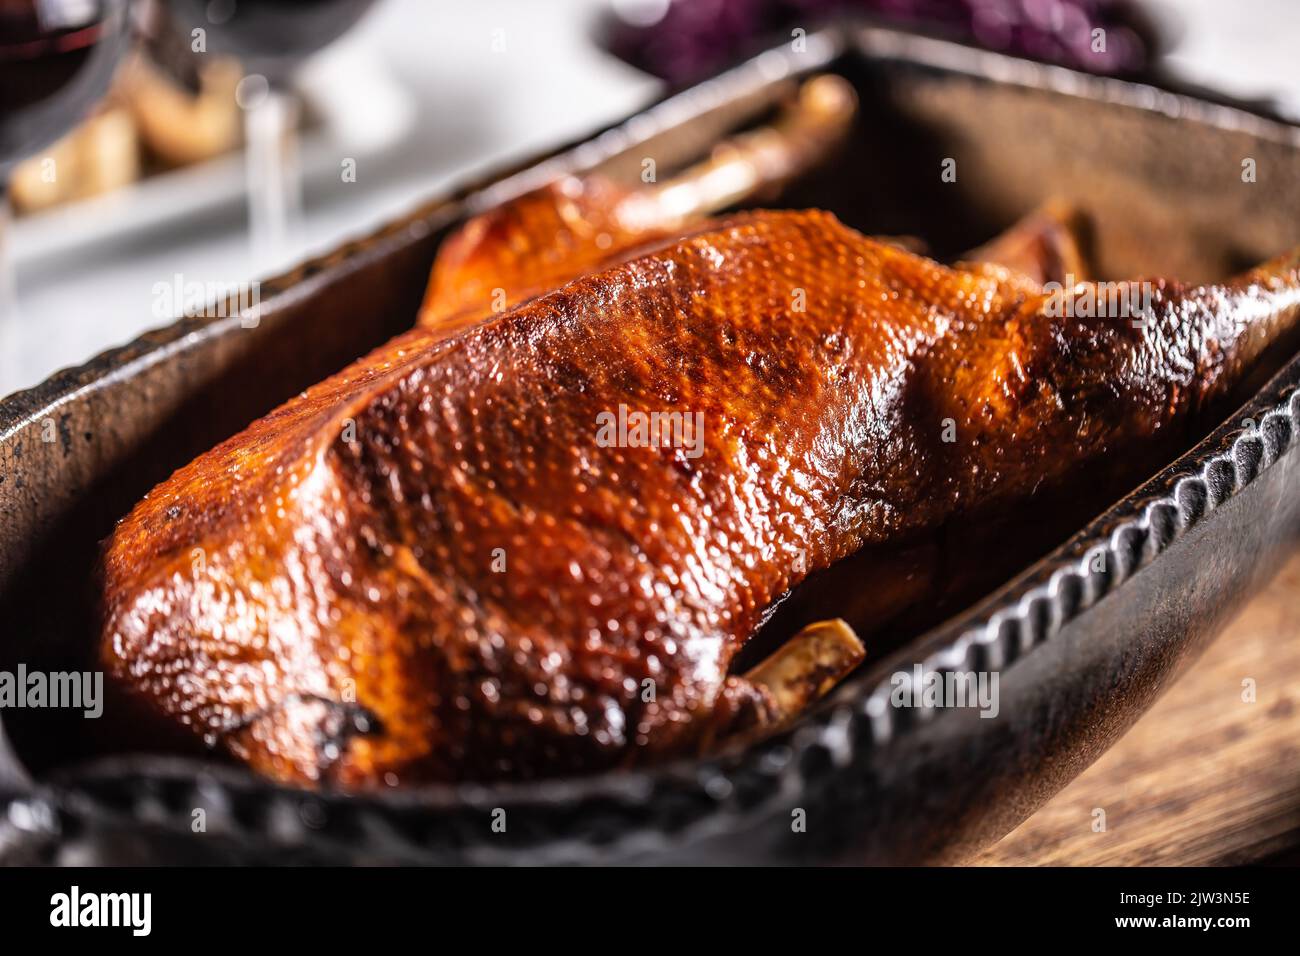 Traditionally roasted goose in an original baking dish. Stock Photo